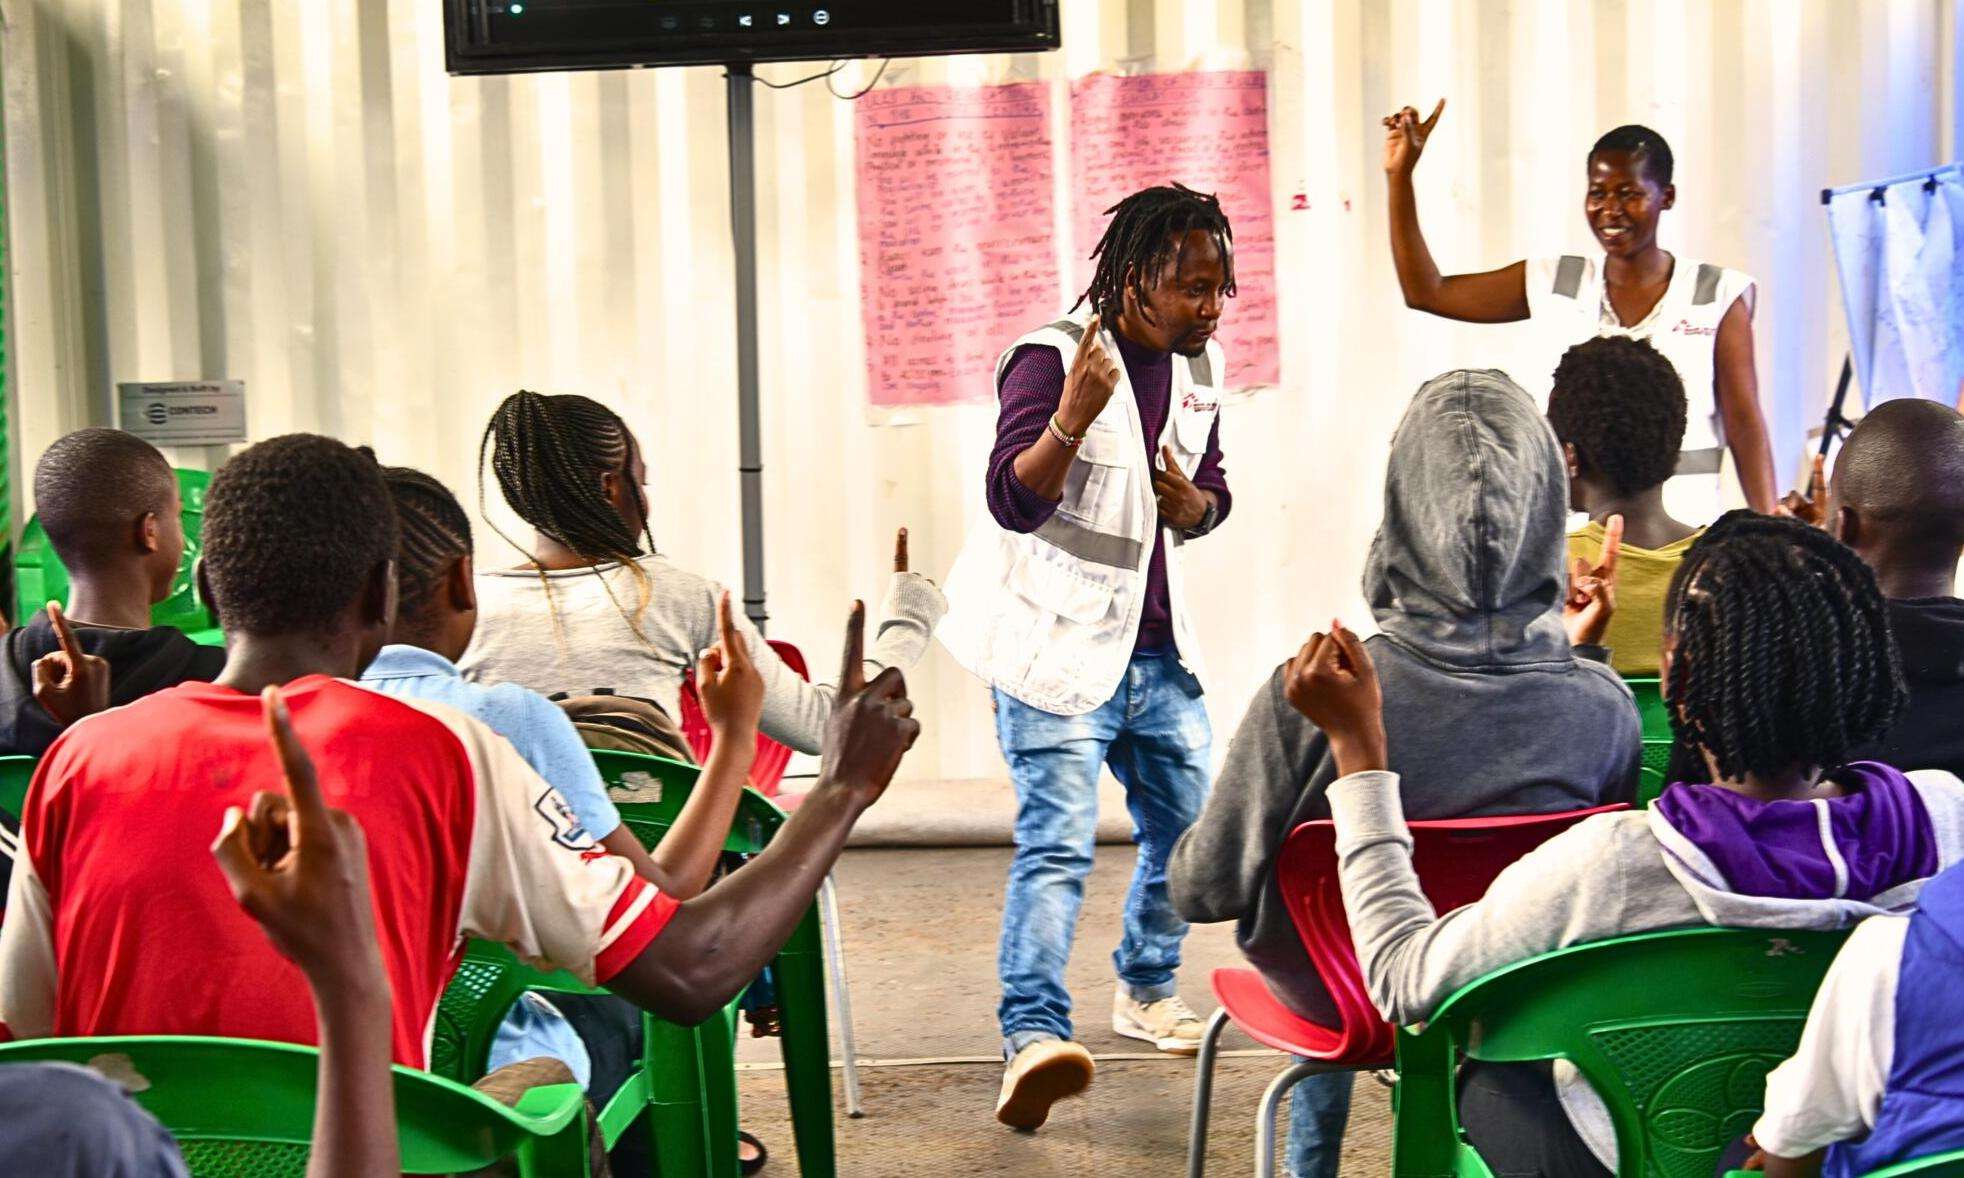 MSF staff lead youth in an ice breaker session at the Dandora Youth Friendly Center in Nairobi, Kenya.